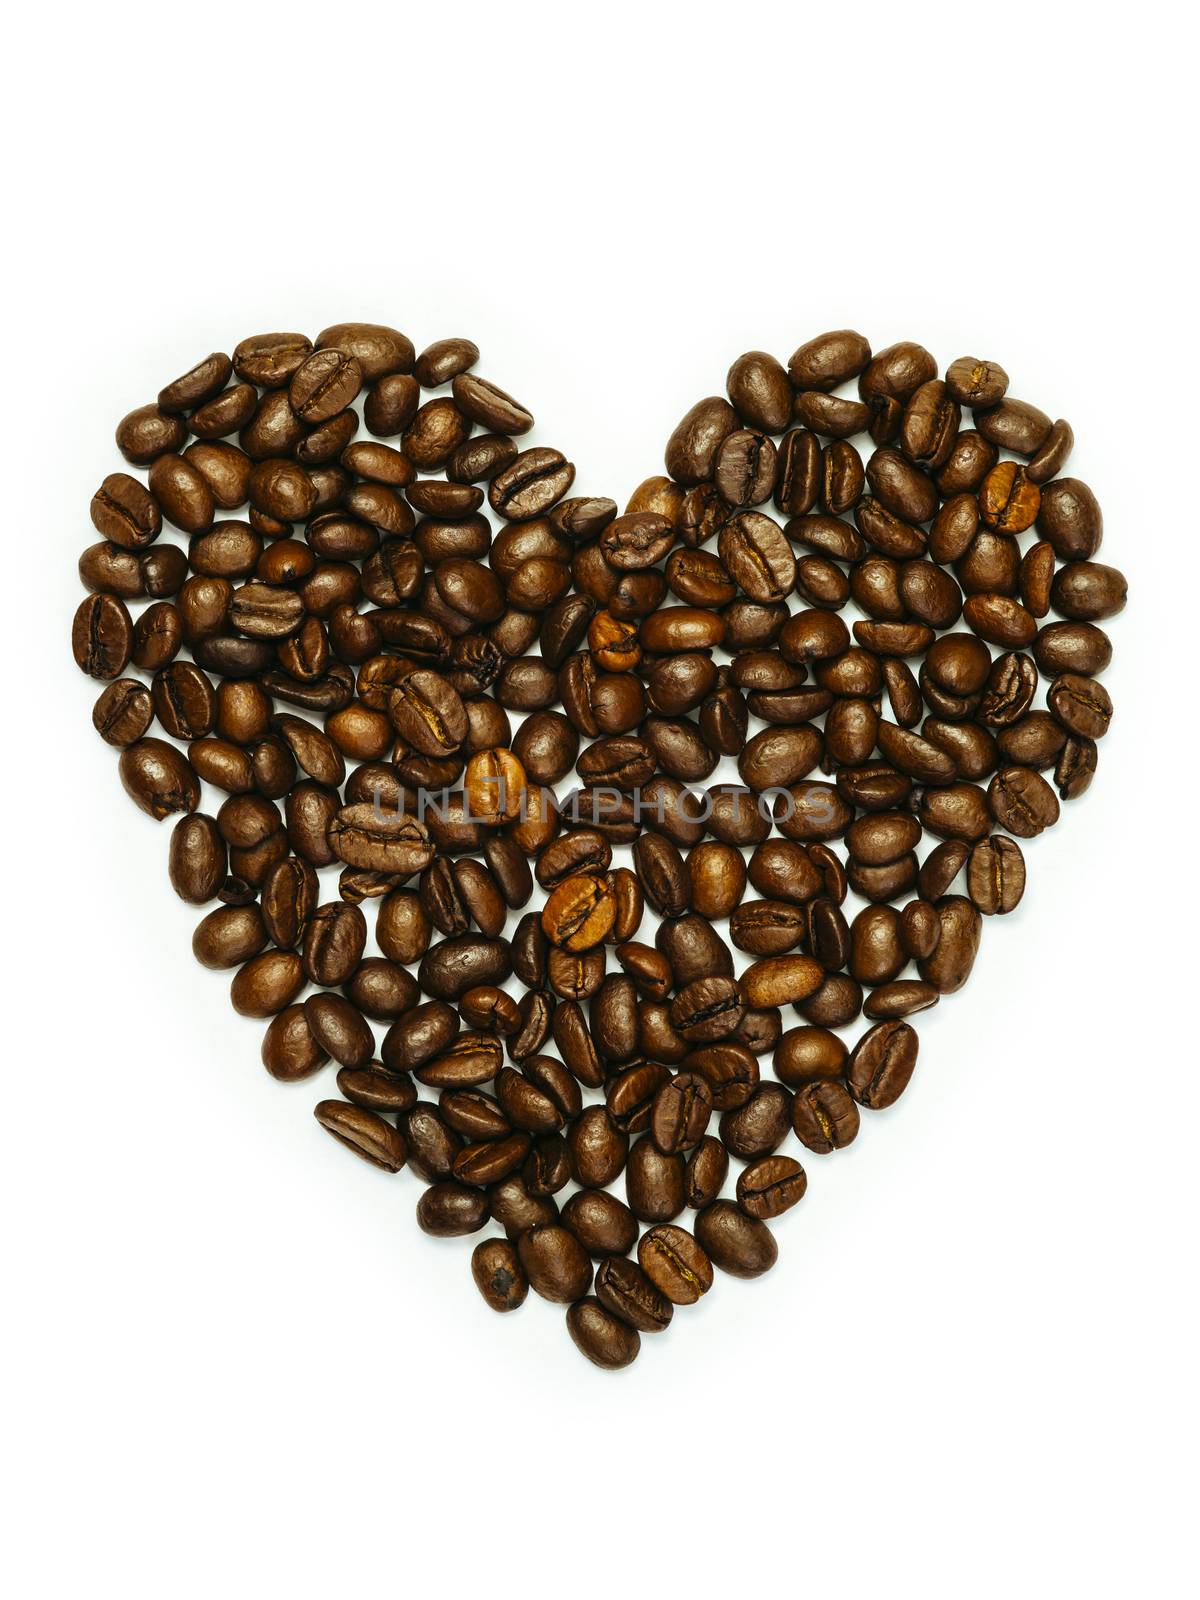 Photo of coffee beans in heart shape isolated over white background.